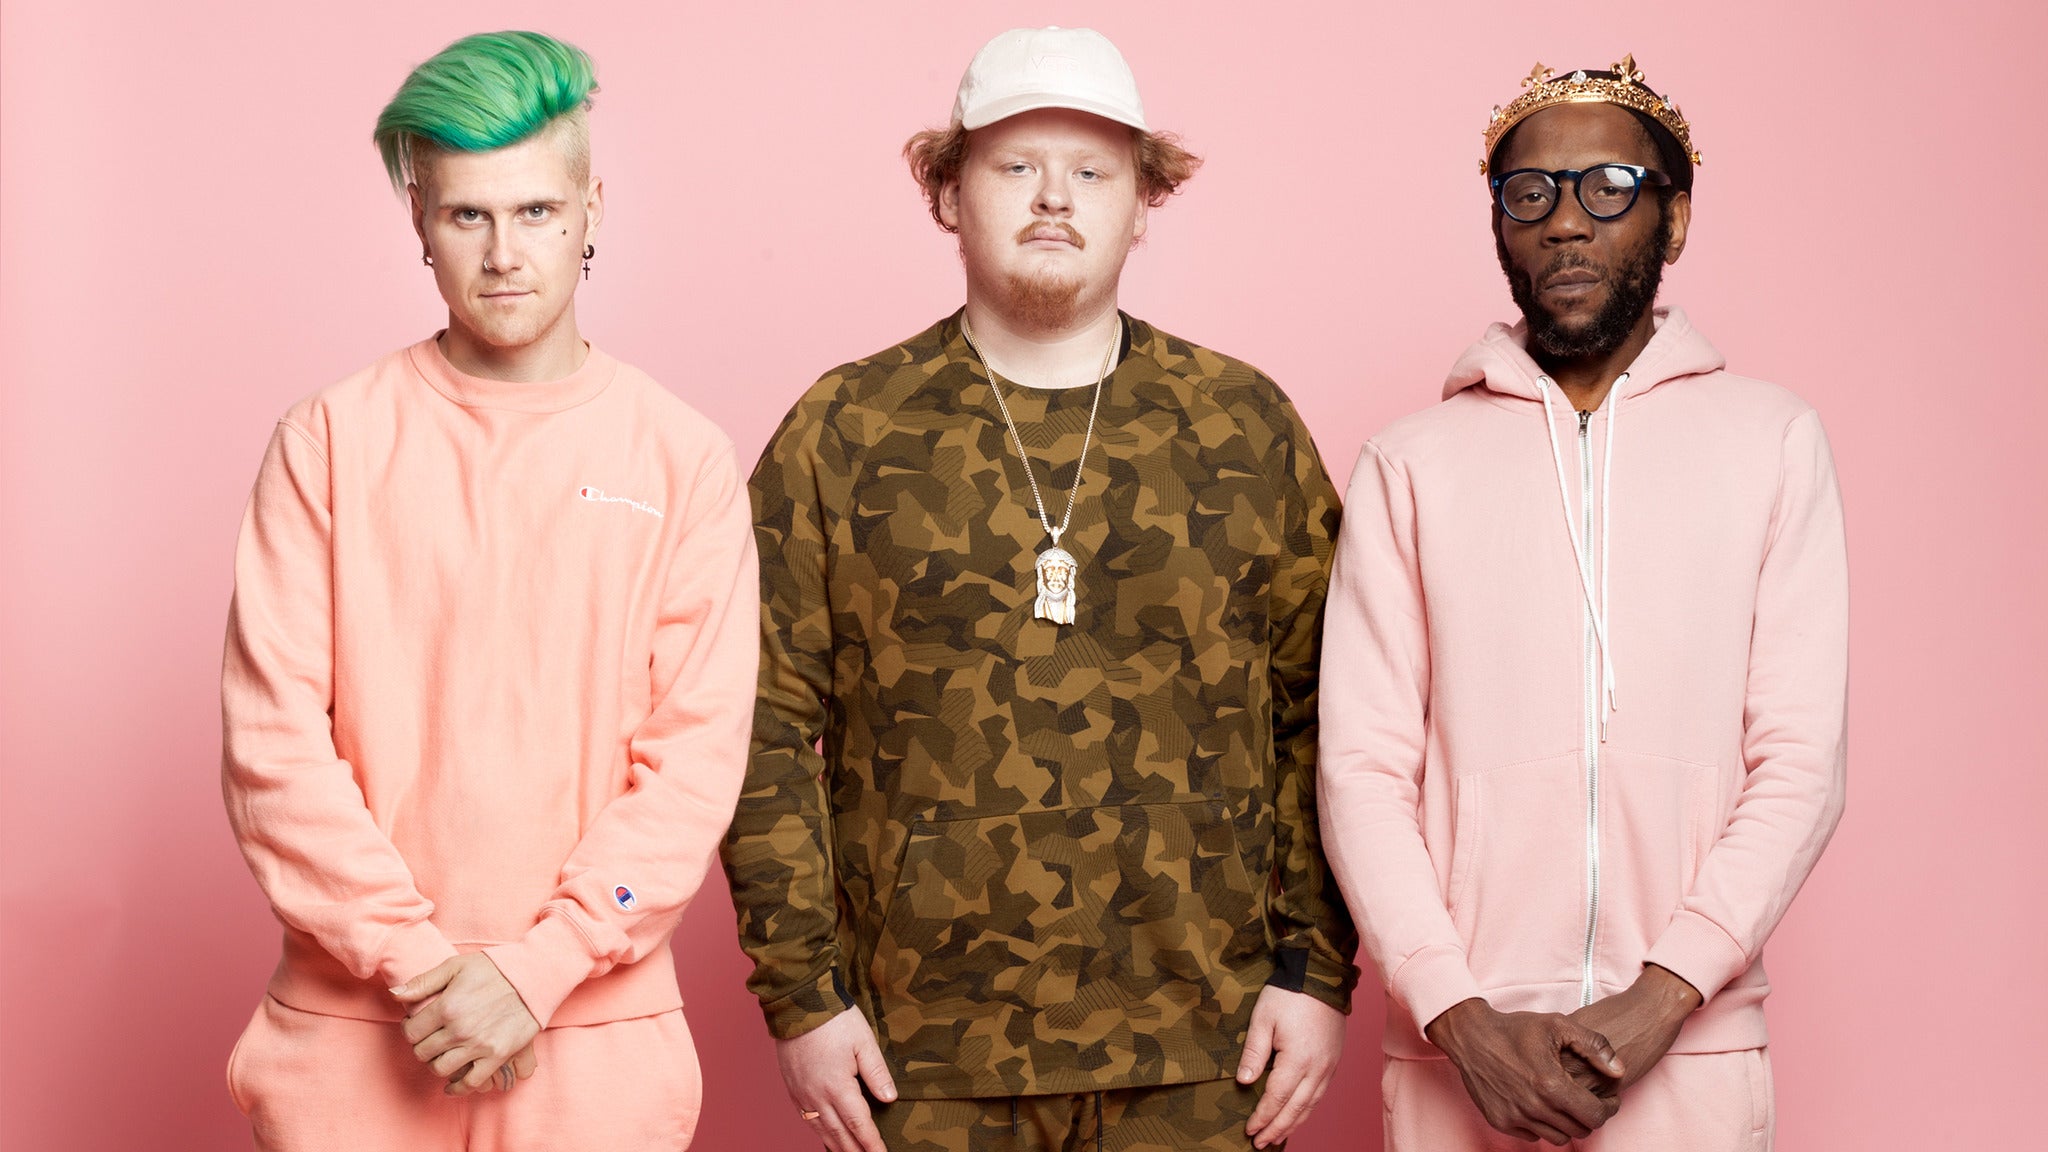 Too Many Zooz in Cambridge promo photo for Exclusive presale offer code